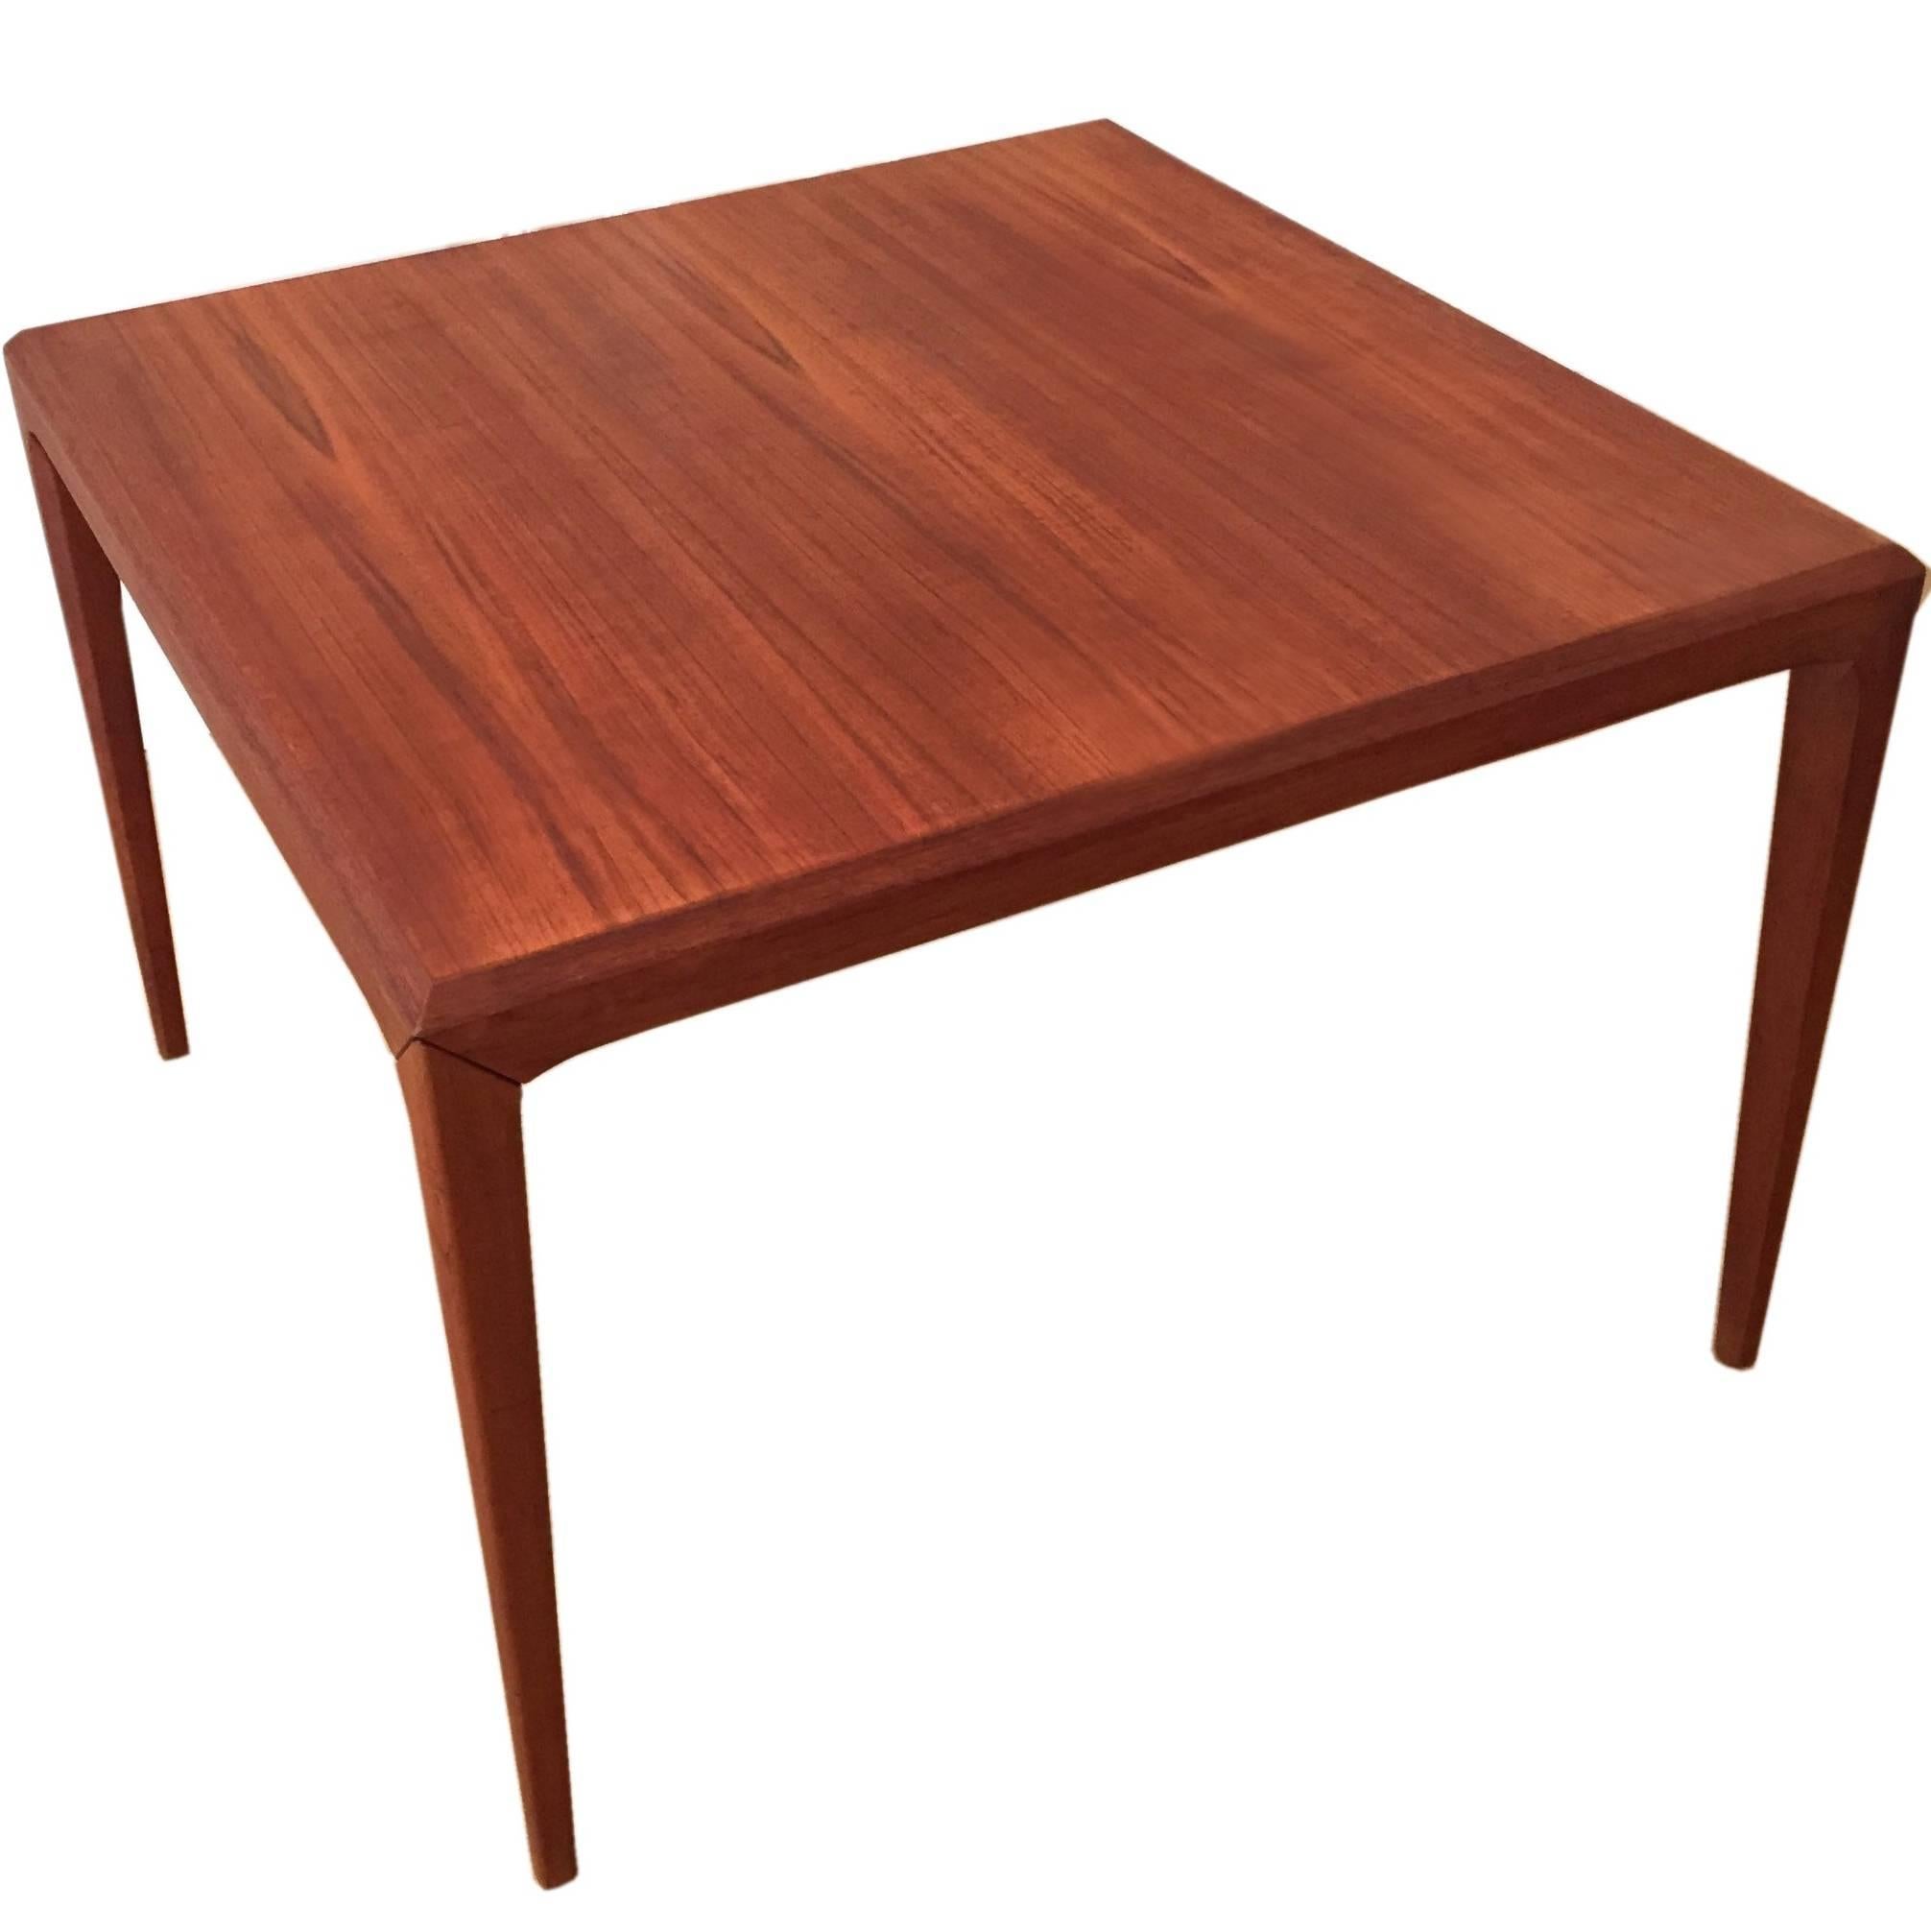 Danish Mid-Century Cubic Teak Coffee Table by Johannes Andersen for Silkeborg For Sale